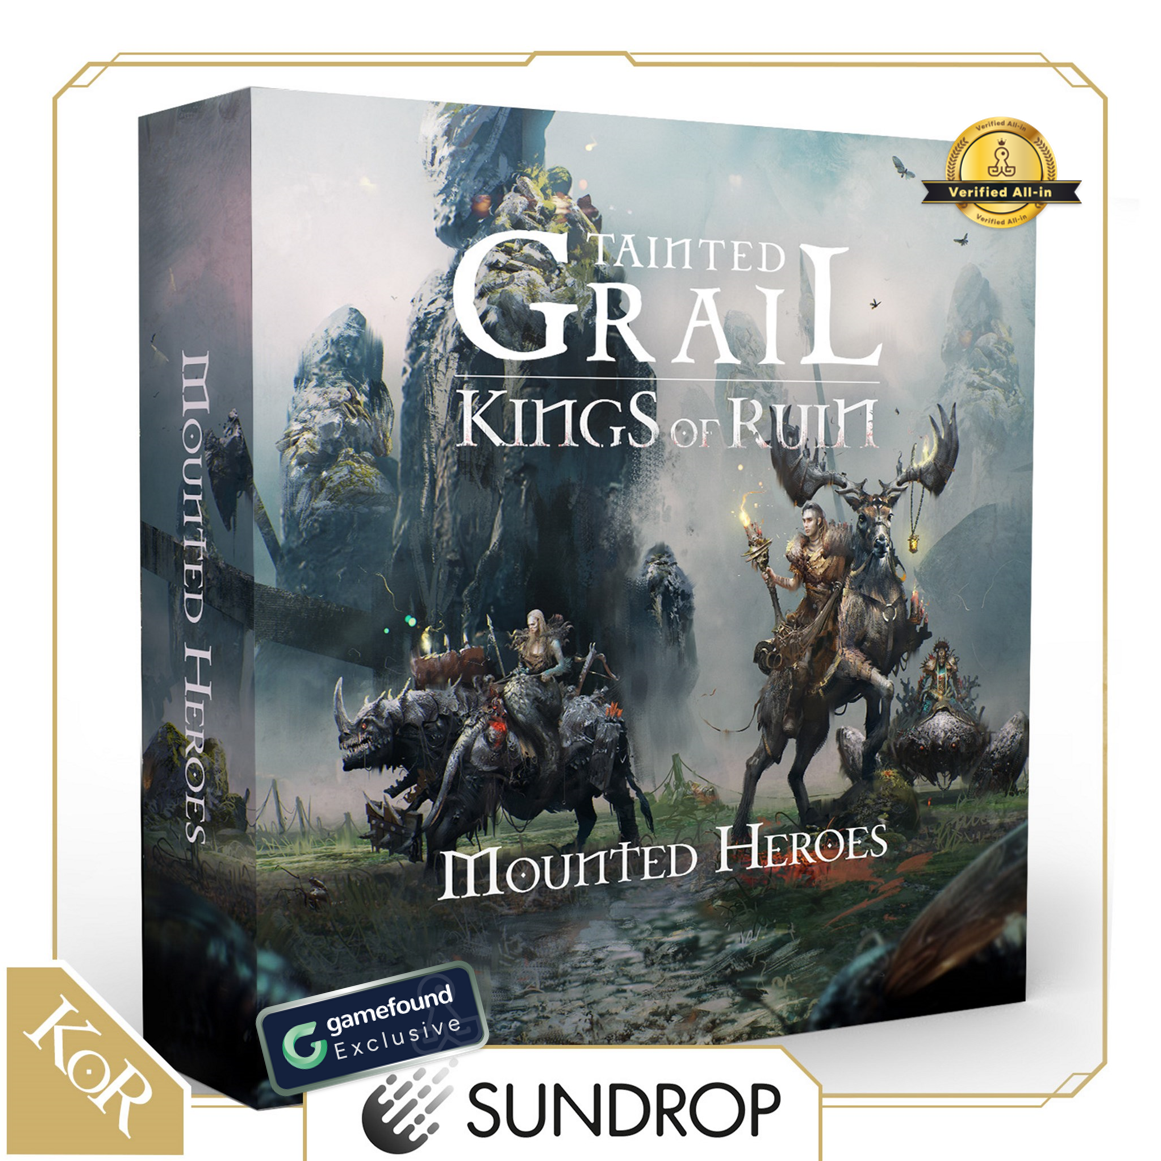 Gamefound Exclusive Tainted Grail: Kings of Ruin Mounted Heroes Expansion, Sundrop Edition